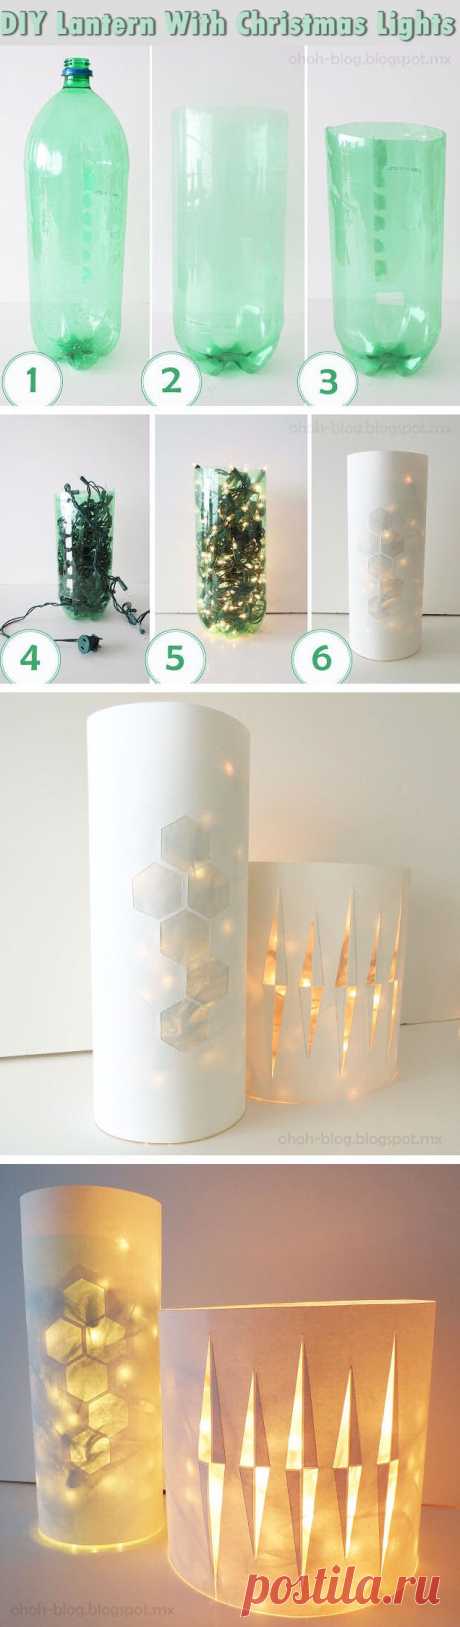 DIY Lantern With Christmas Lights Pictures, Photos, and Images for Facebook, Tumblr, Pinterest, and Twitter